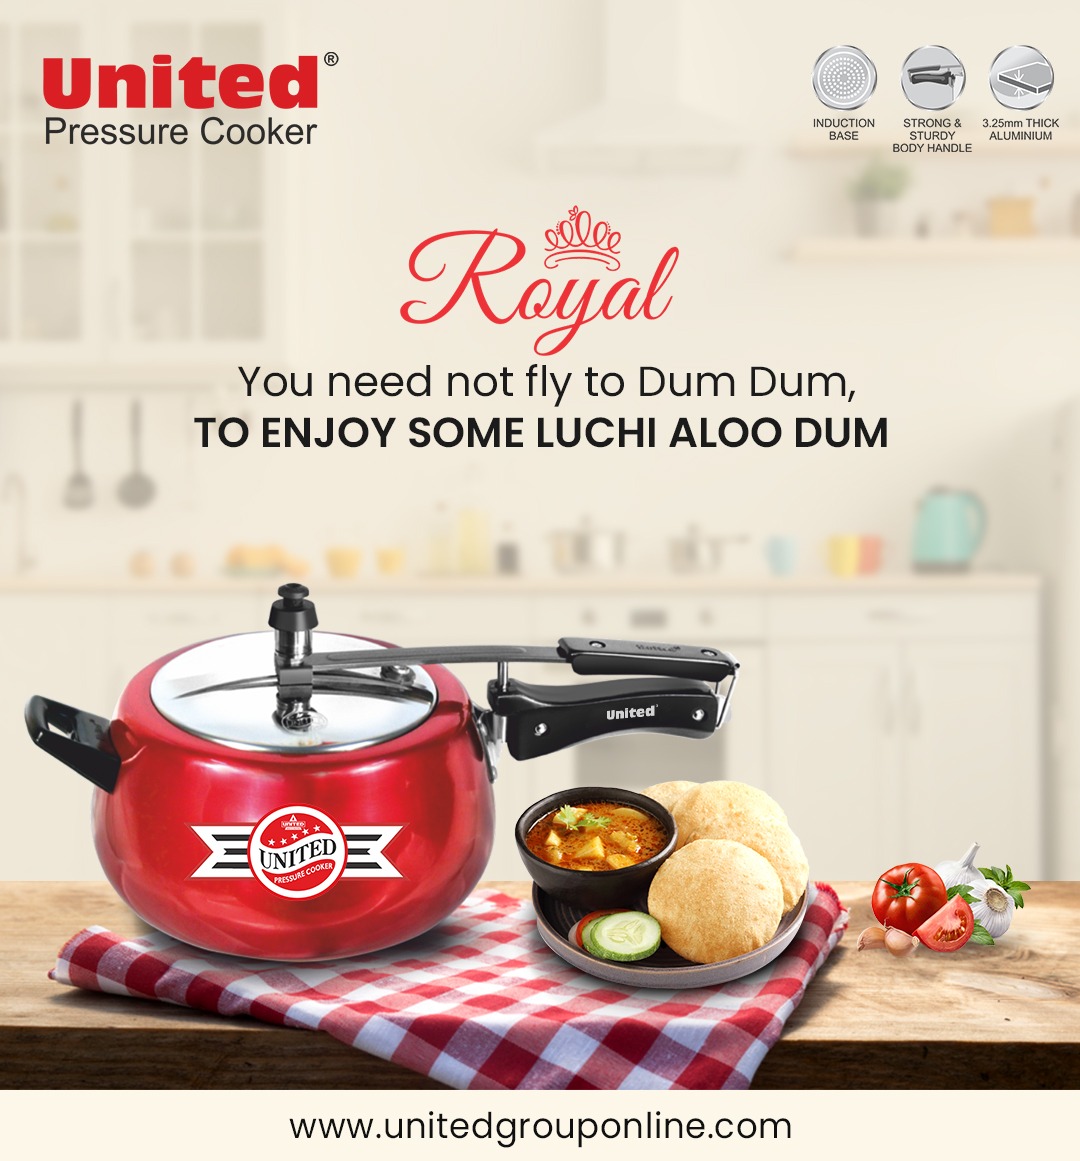 You need not fly to Dum Dum , To enjoy some luchi aloo Dum. 
. 
. 
.  #Unitedgroup #Cookers #Cookware #PressureCookers #HealthyCooking #Deep #roundedkadai #RoundedTawa #Wok #Stwe #Pot #StainlessSteel #Durable #Reliable #PremiumQuality #Tastyfood #Chefchoice #Qualityproduct